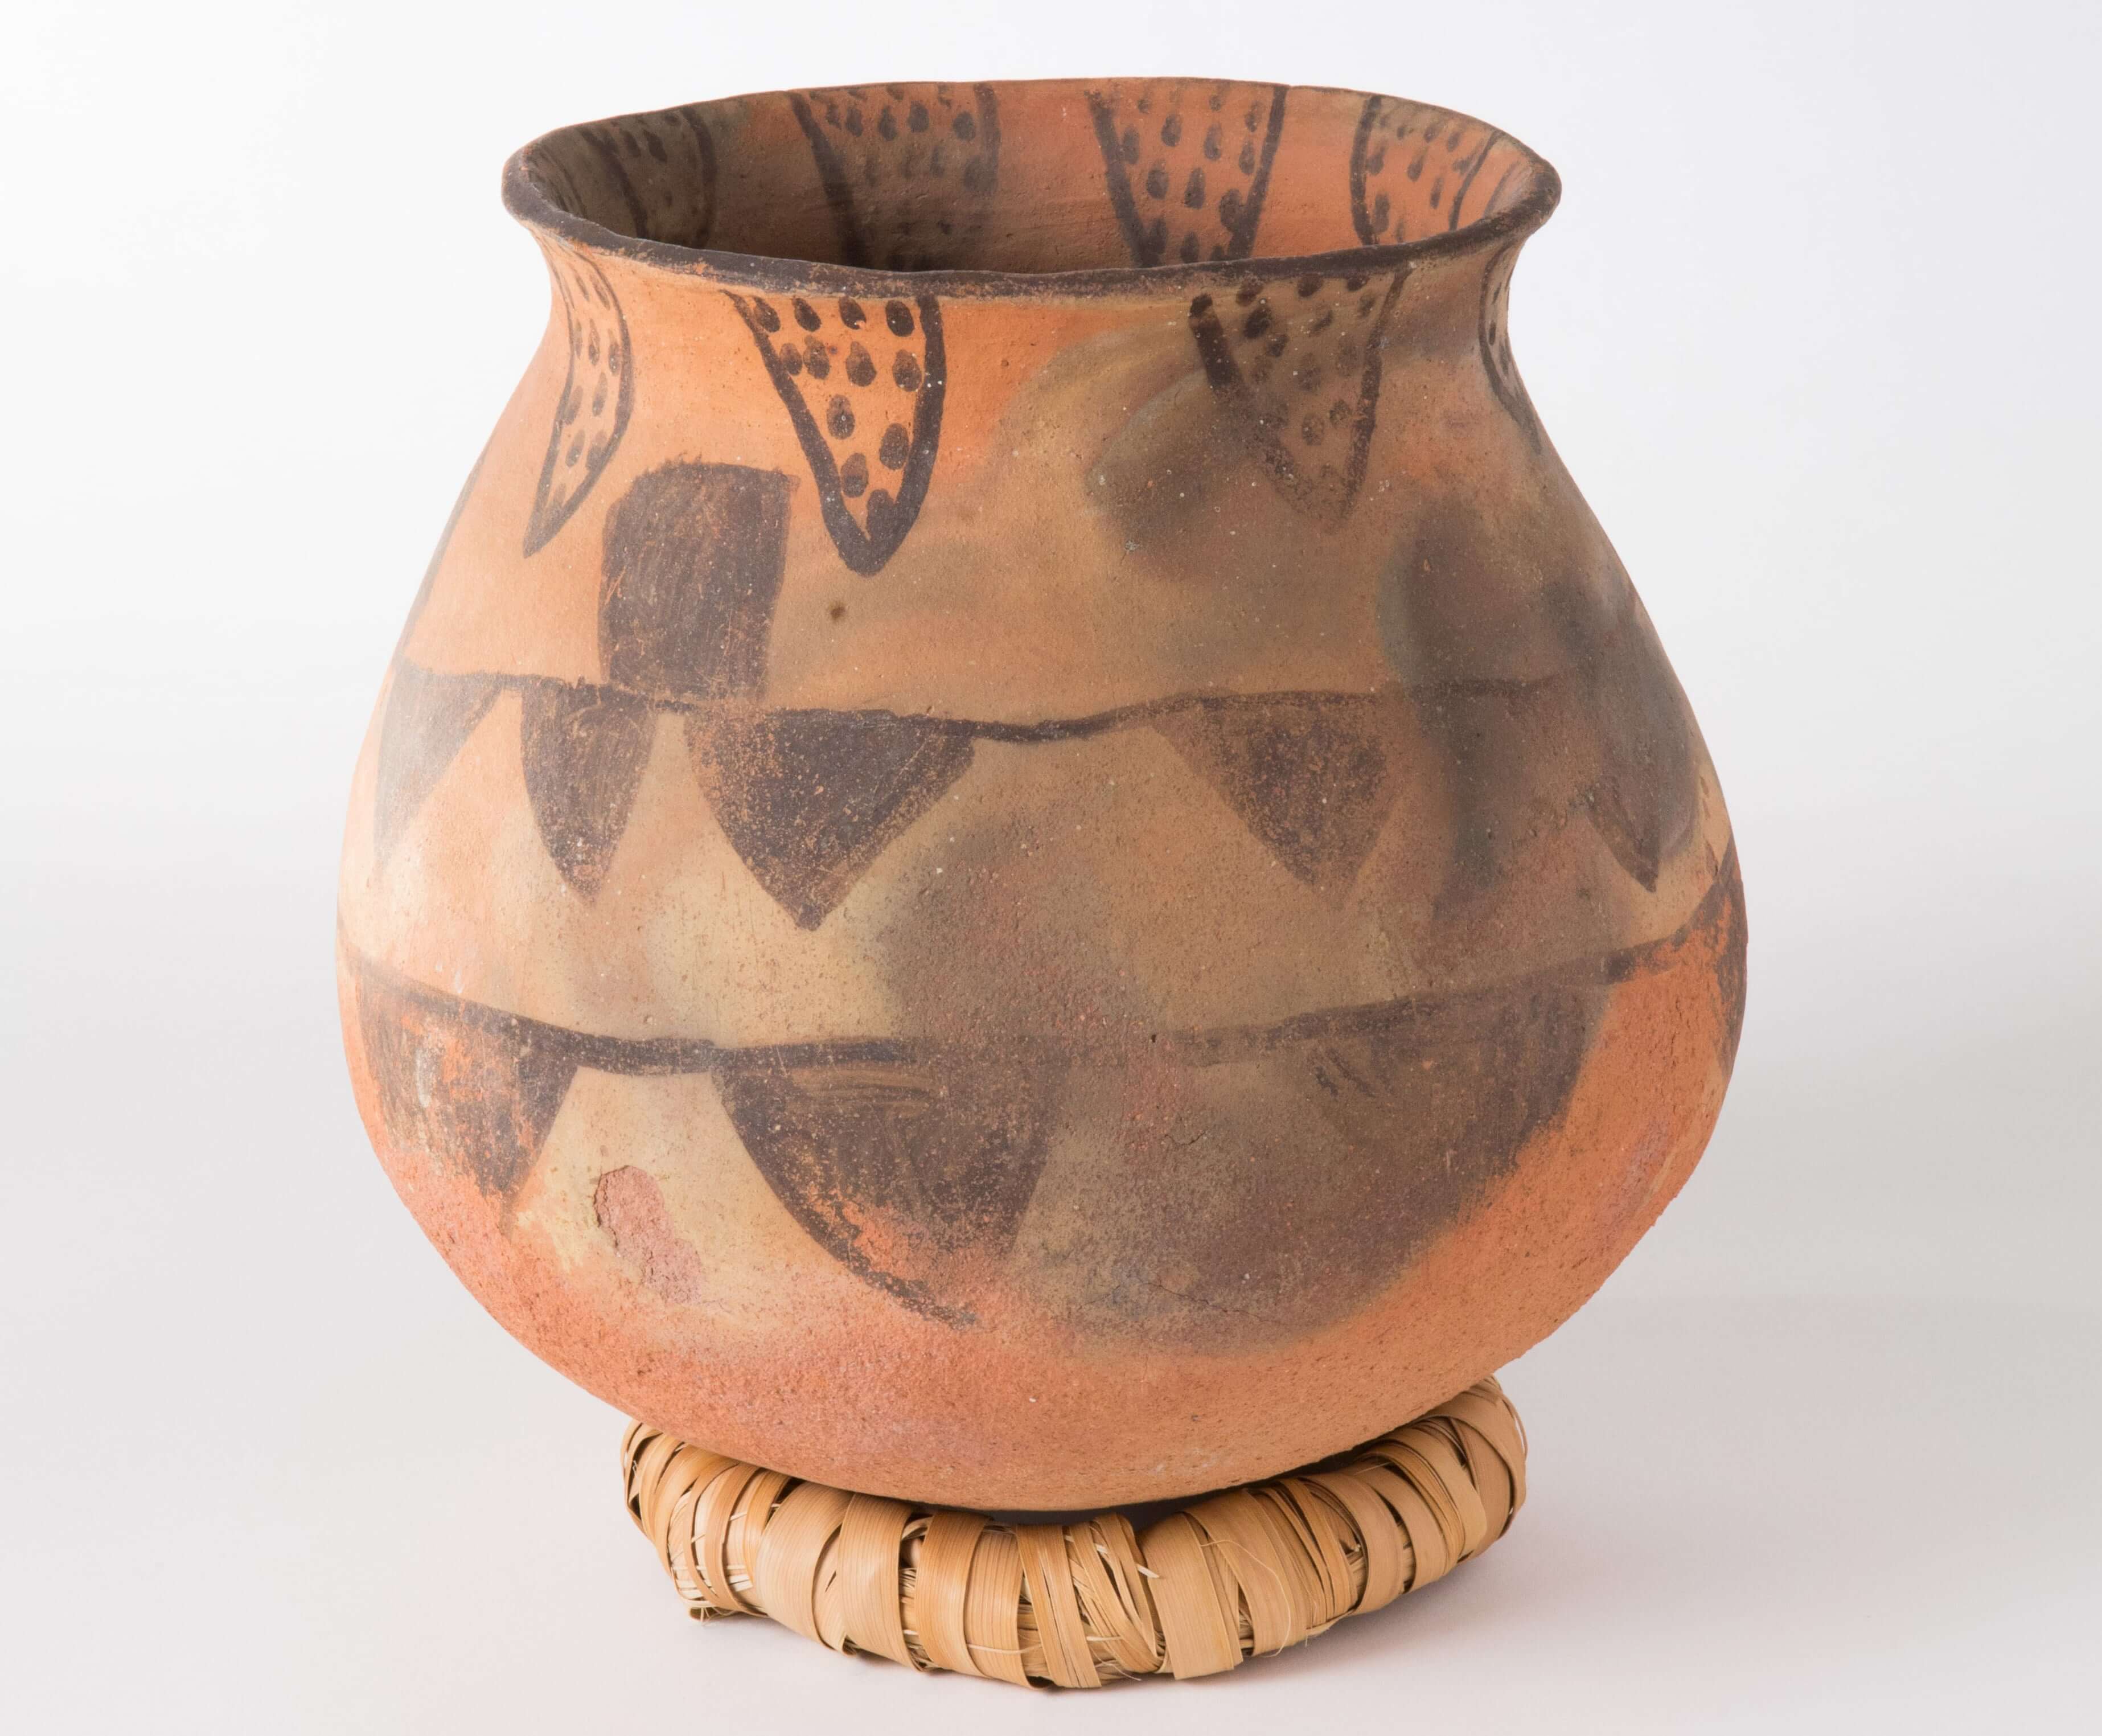 A traditional Cahuilla pottery vessel, called an olla, featuring a black triangular design.